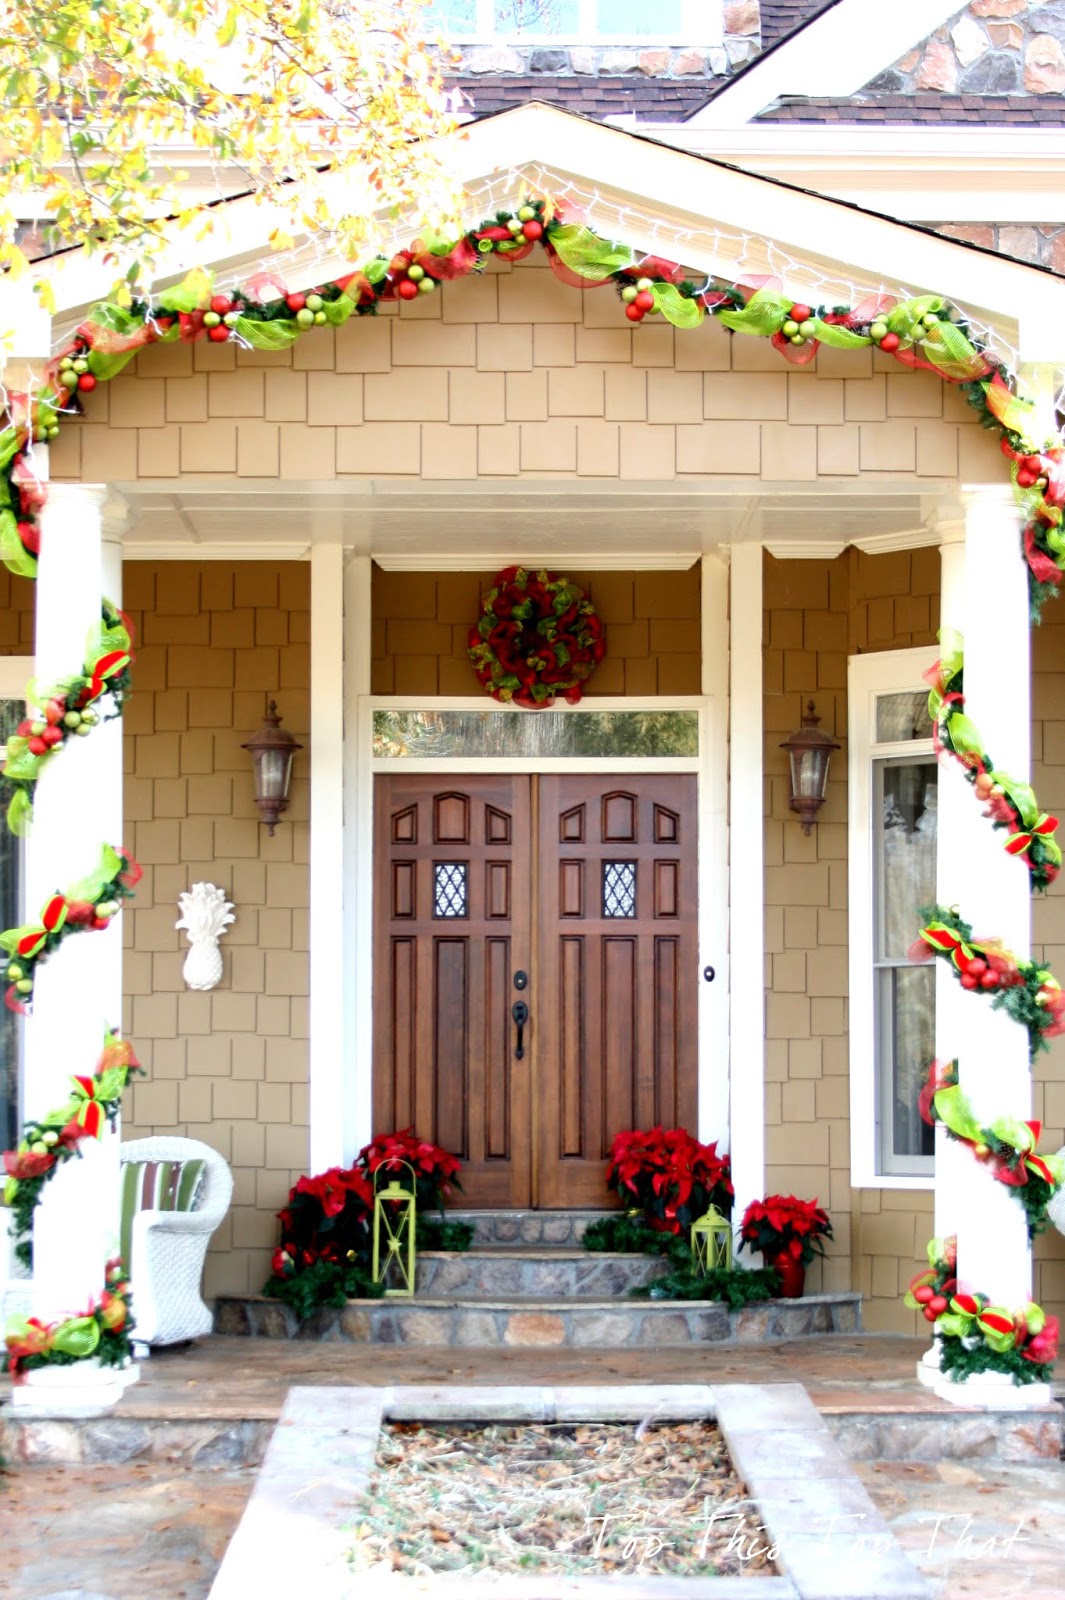 45 Christmas Decorations Ideas For House - Decoration Love